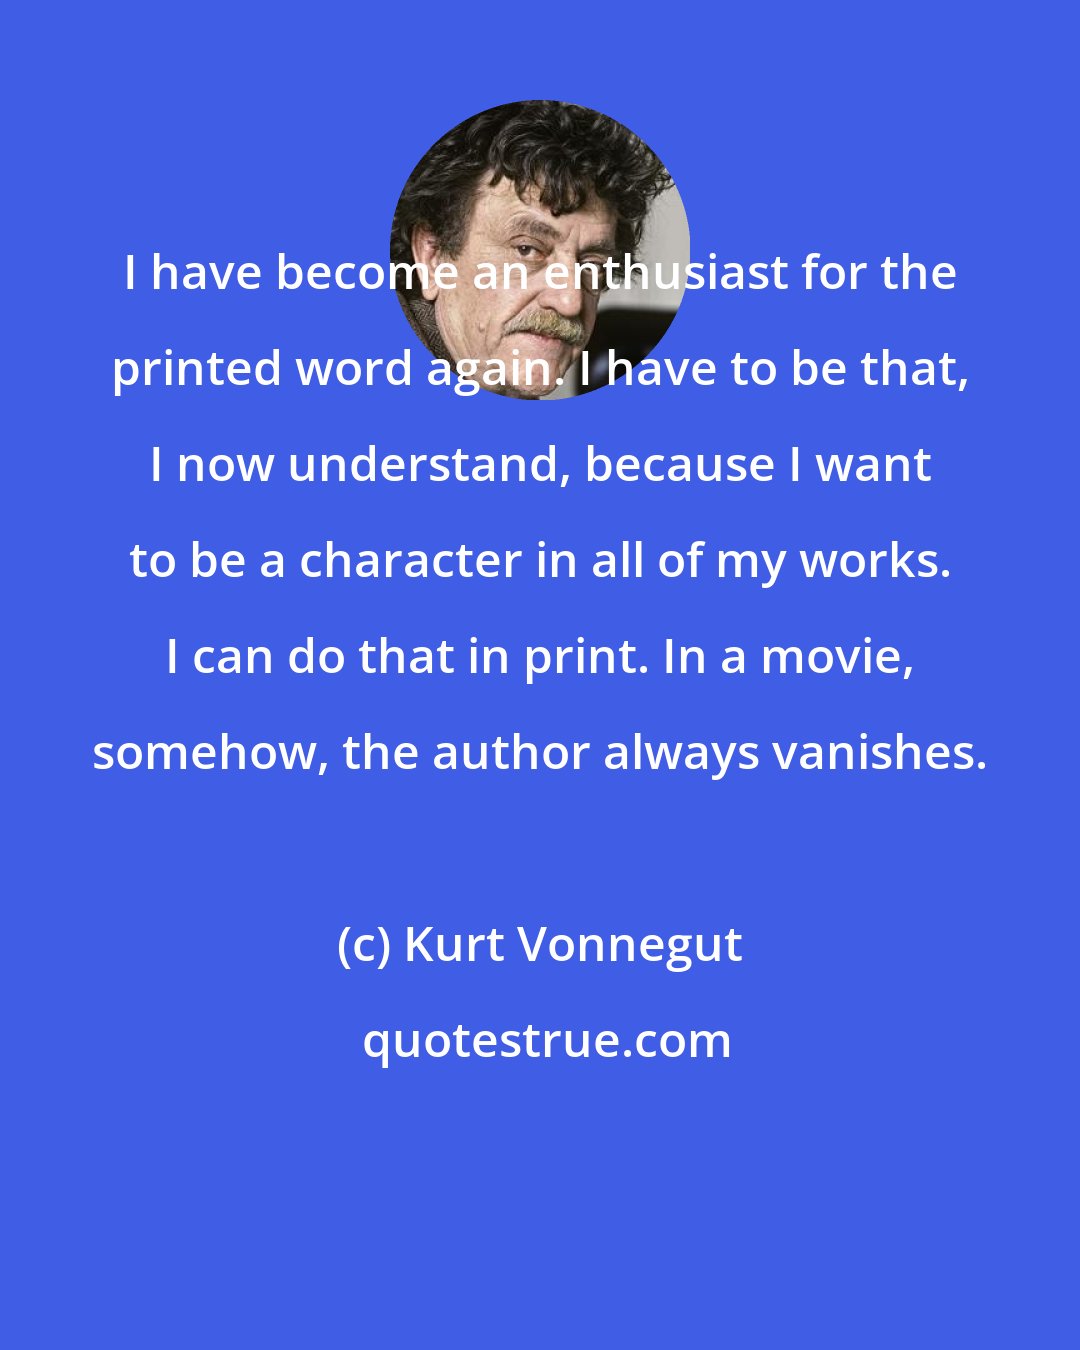 Kurt Vonnegut: I have become an enthusiast for the printed word again. I have to be that, I now understand, because I want to be a character in all of my works. I can do that in print. In a movie, somehow, the author always vanishes.